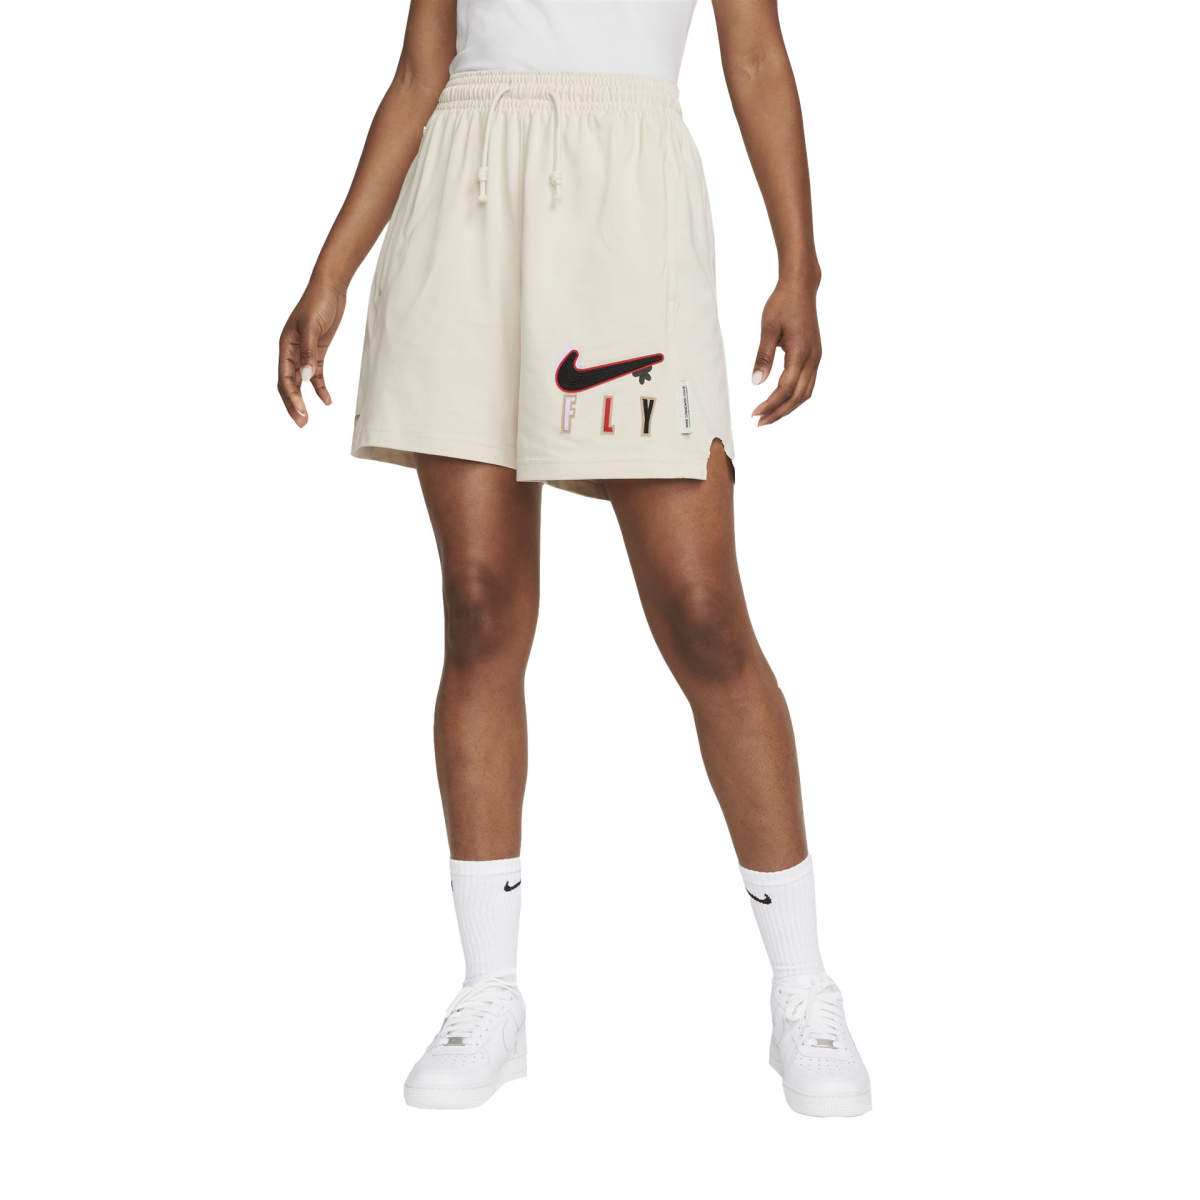 Wmns swoosh fly standard issue short pearl